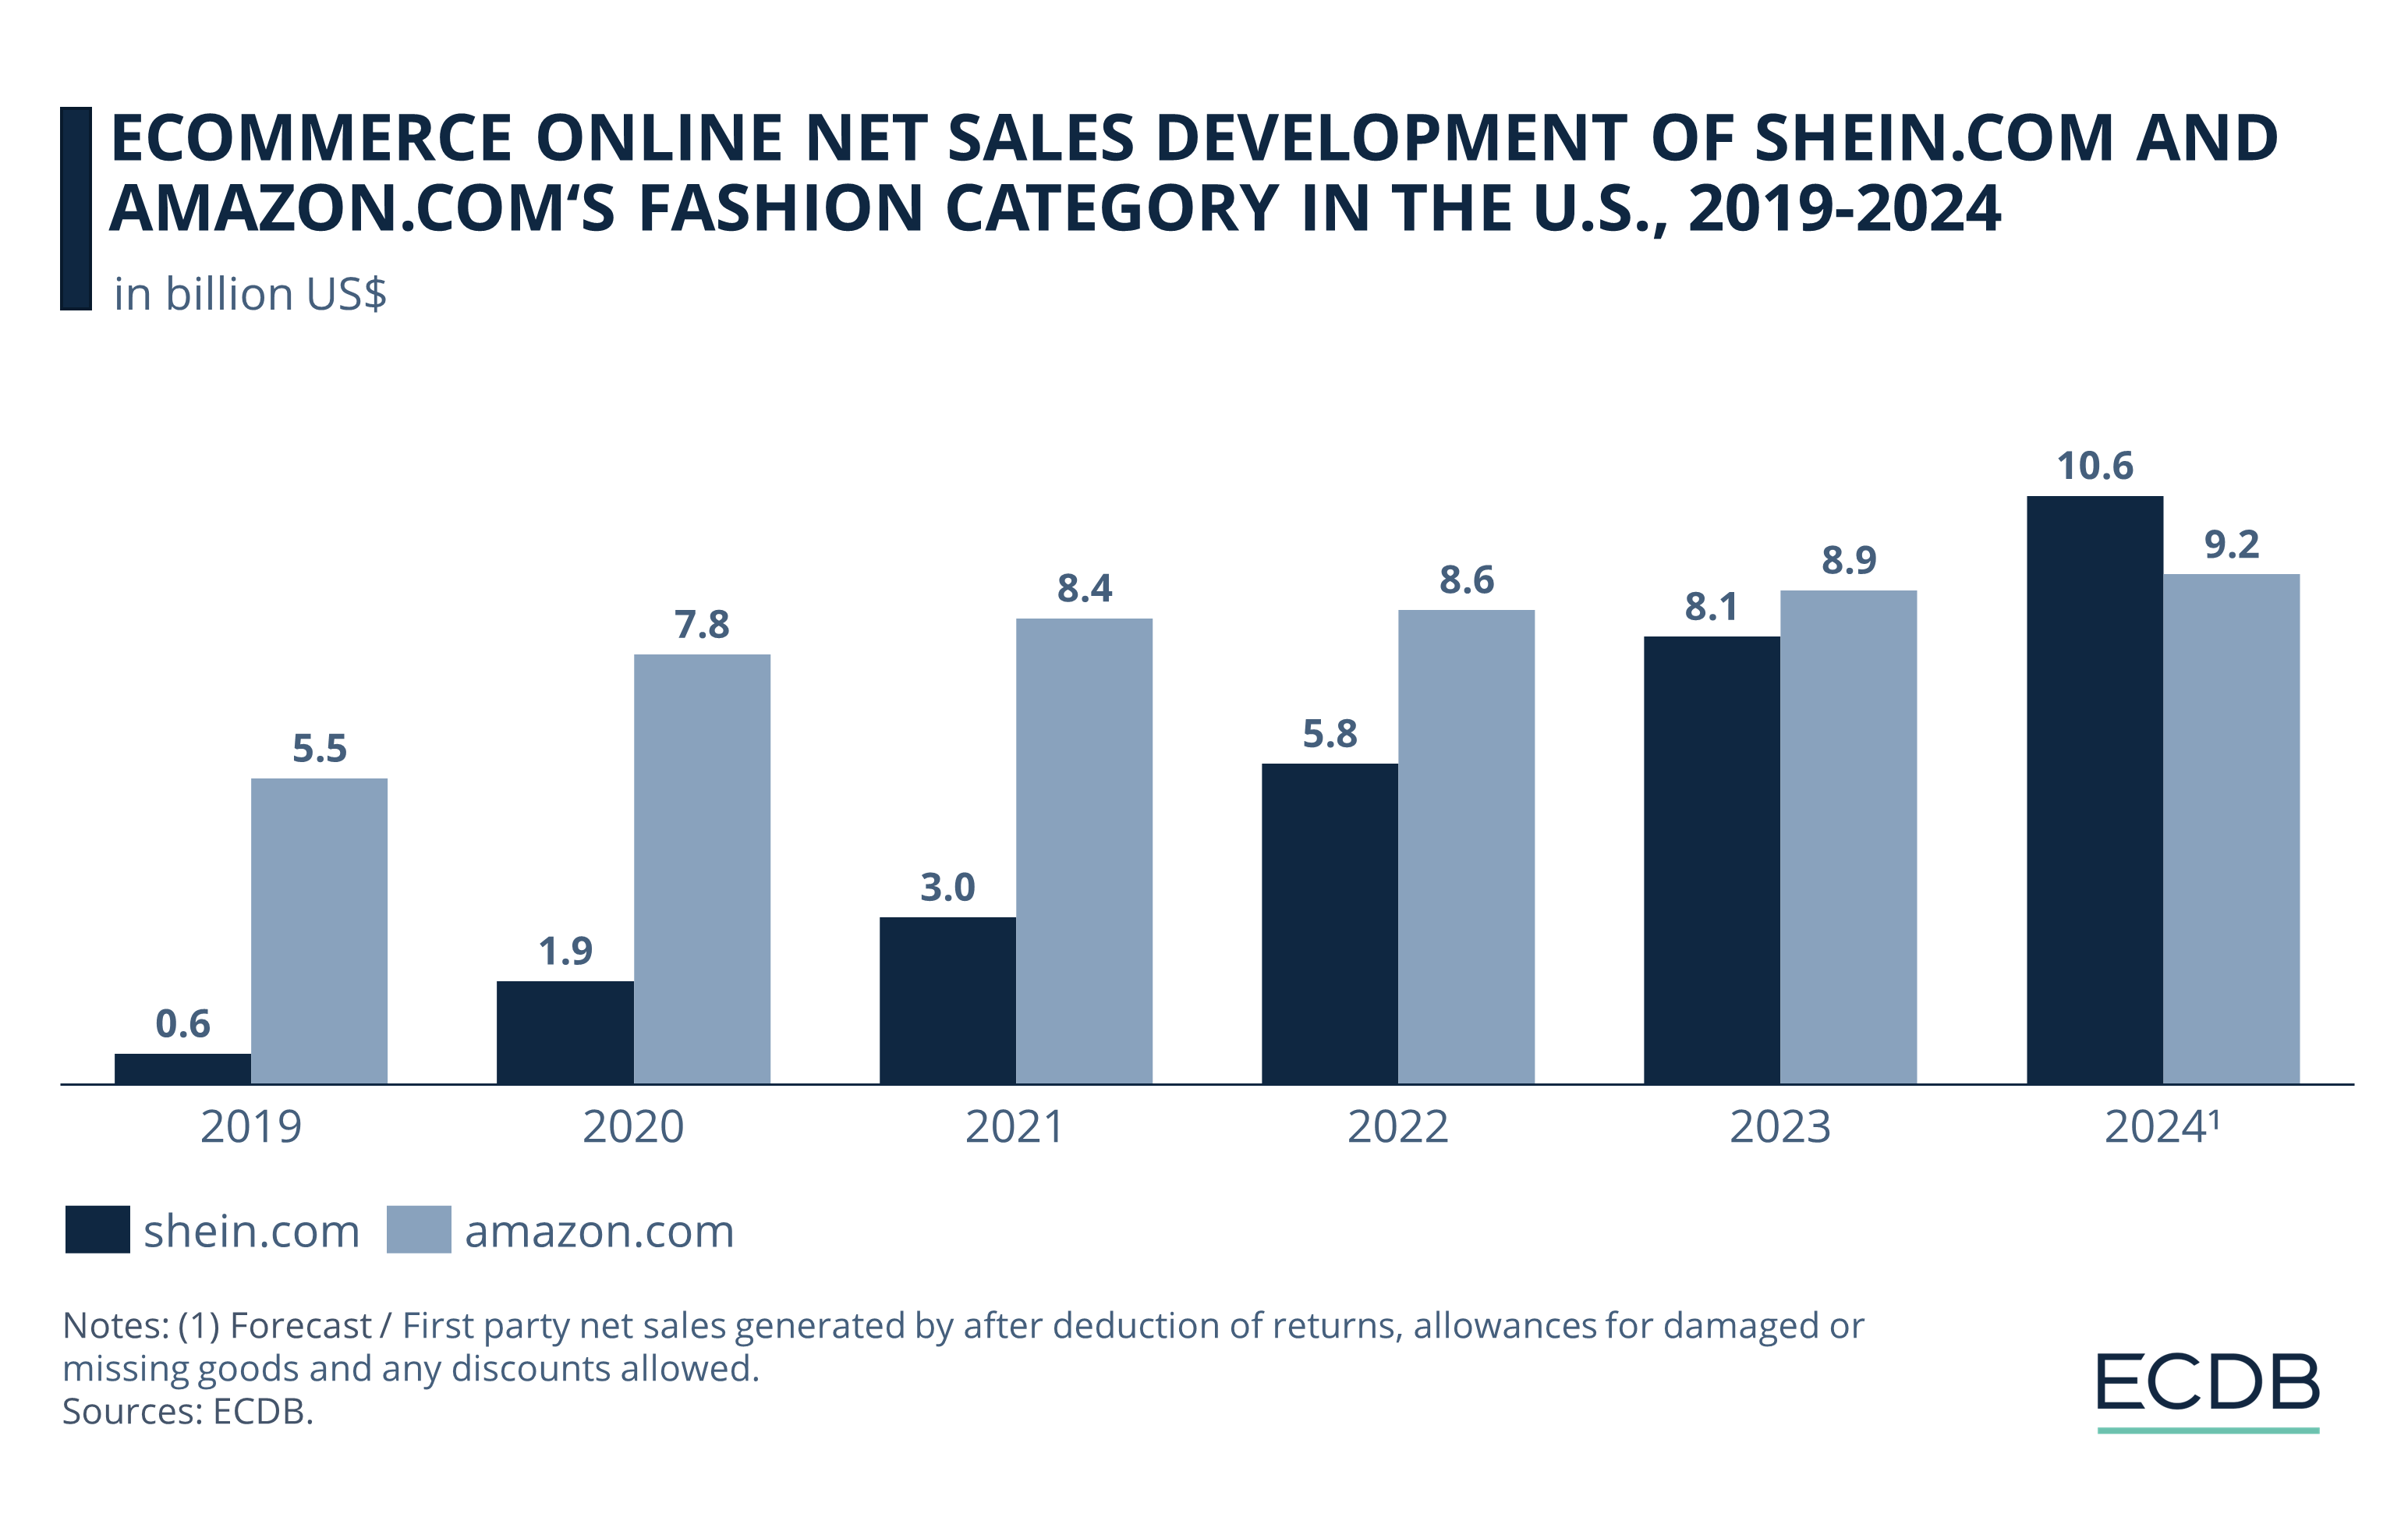 Shein may Open a Marketplace in the United States